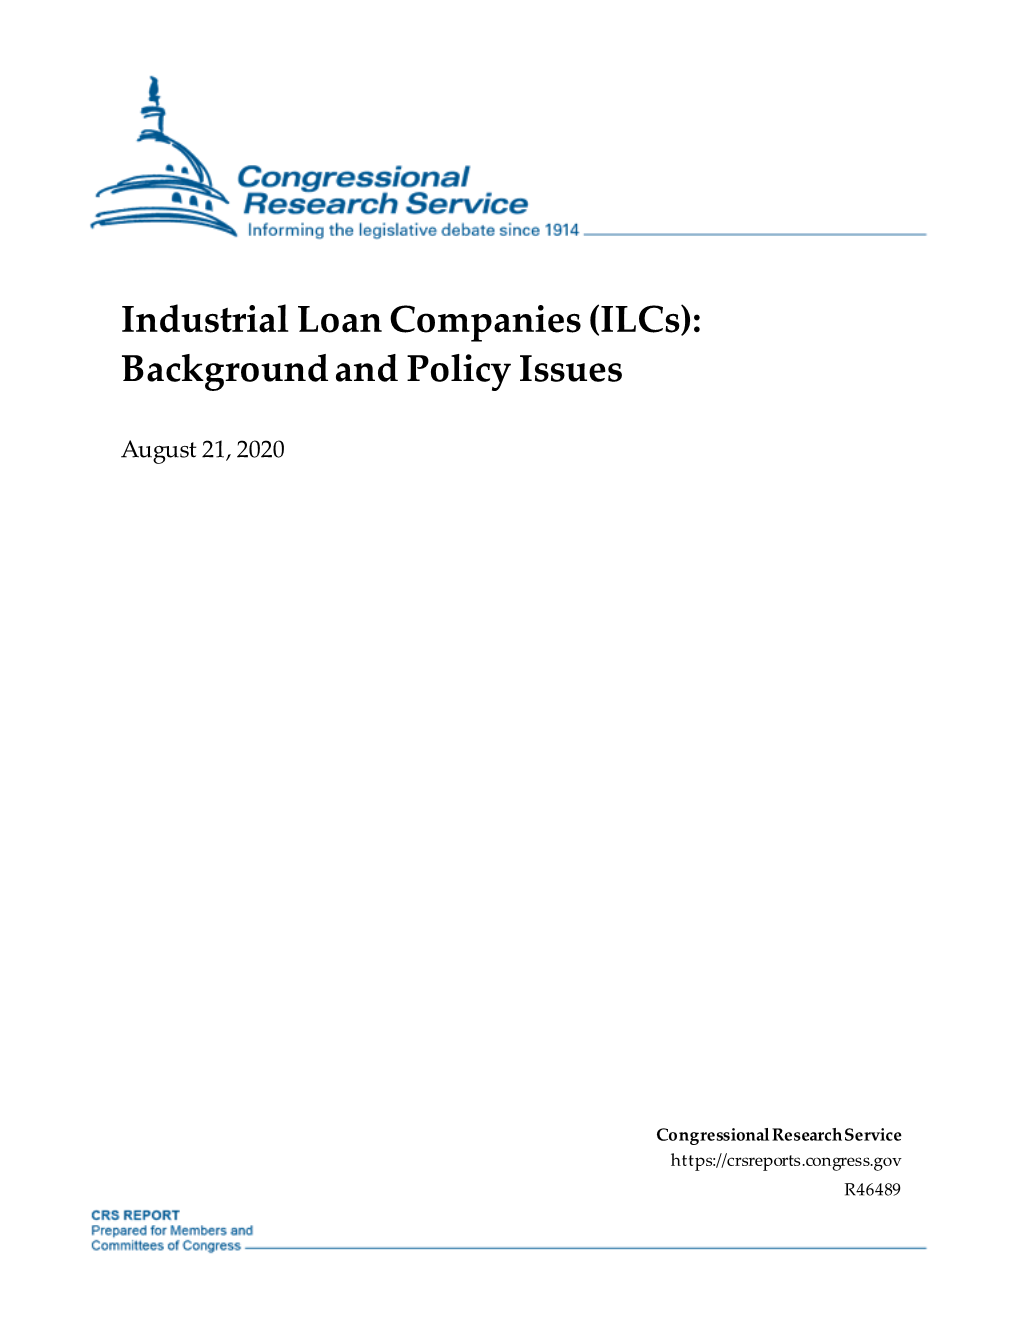 Industrial Loan Companies (Ilcs): Background and Policy Issues